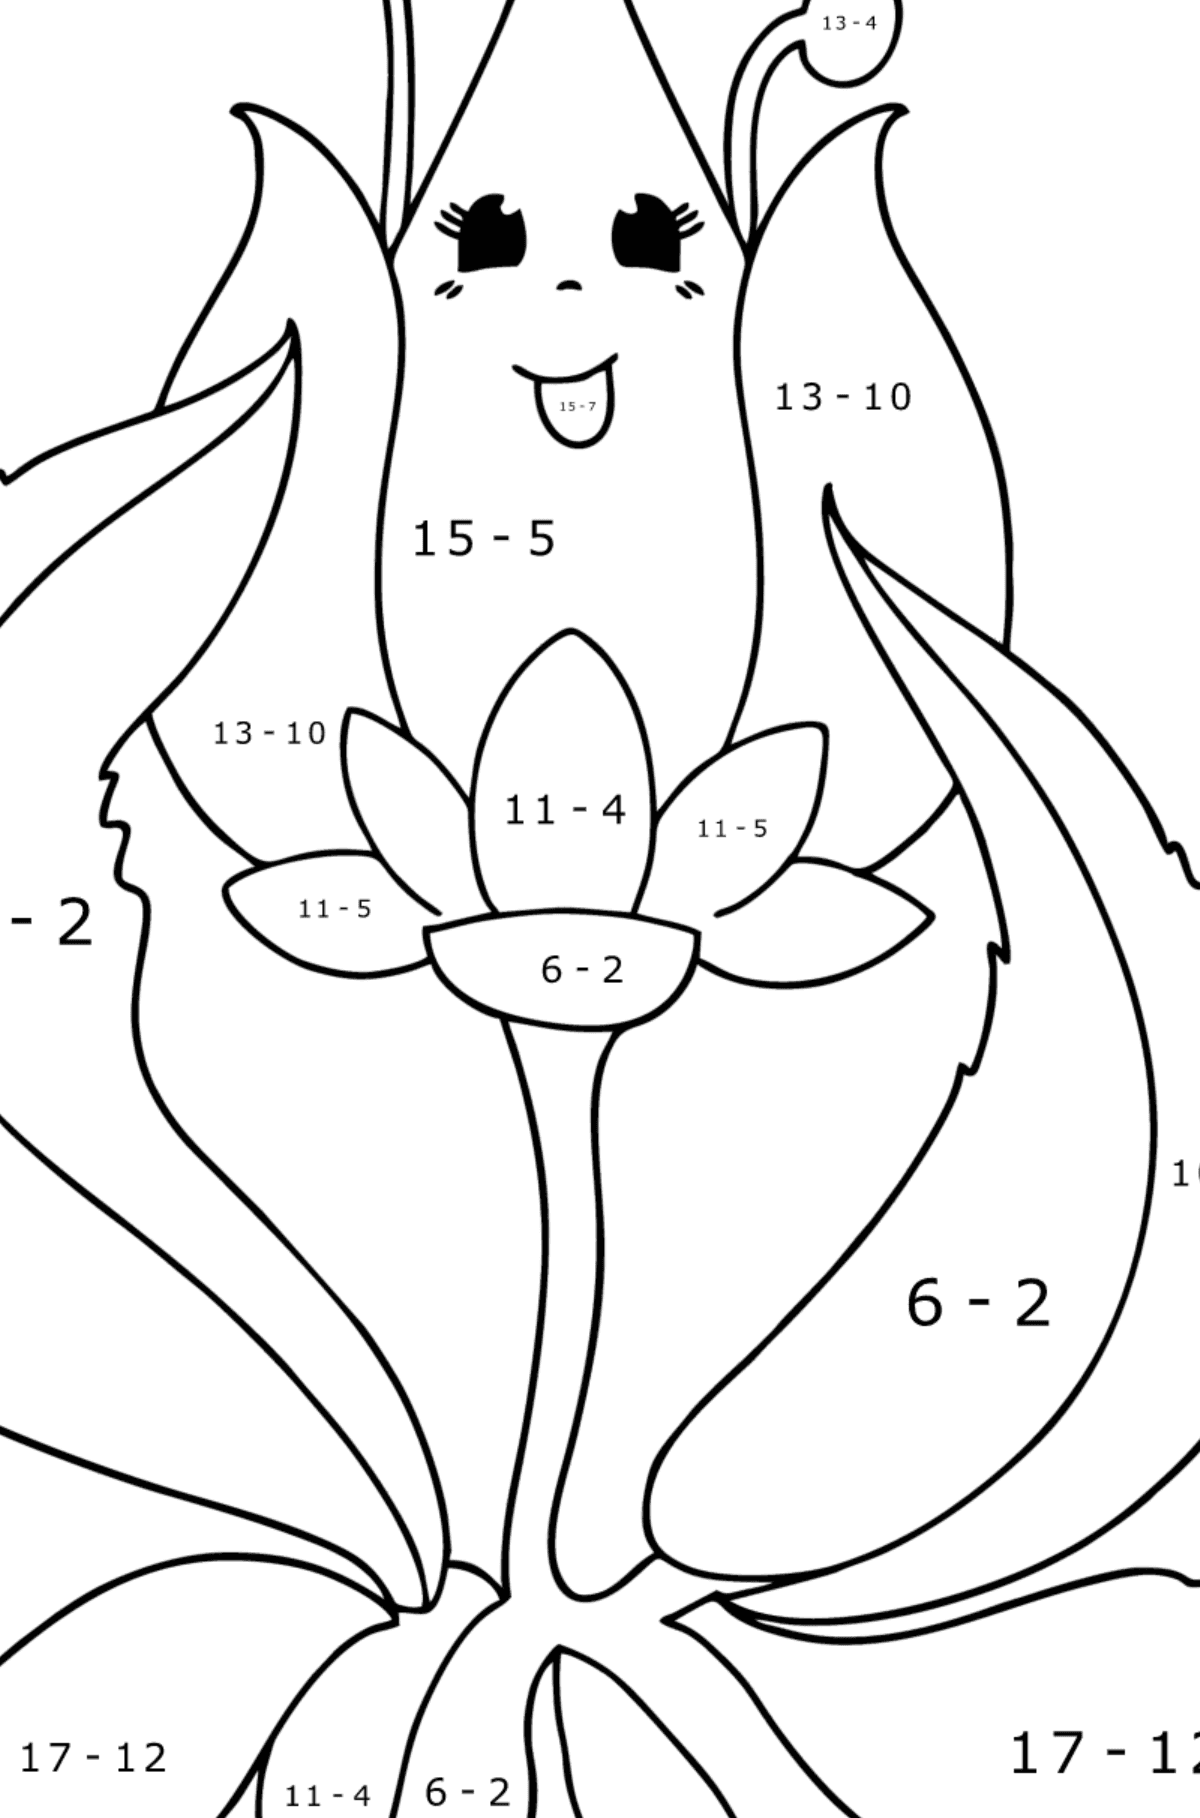 Bud with eyes coloring page - Math Coloring - Subtraction for Kids